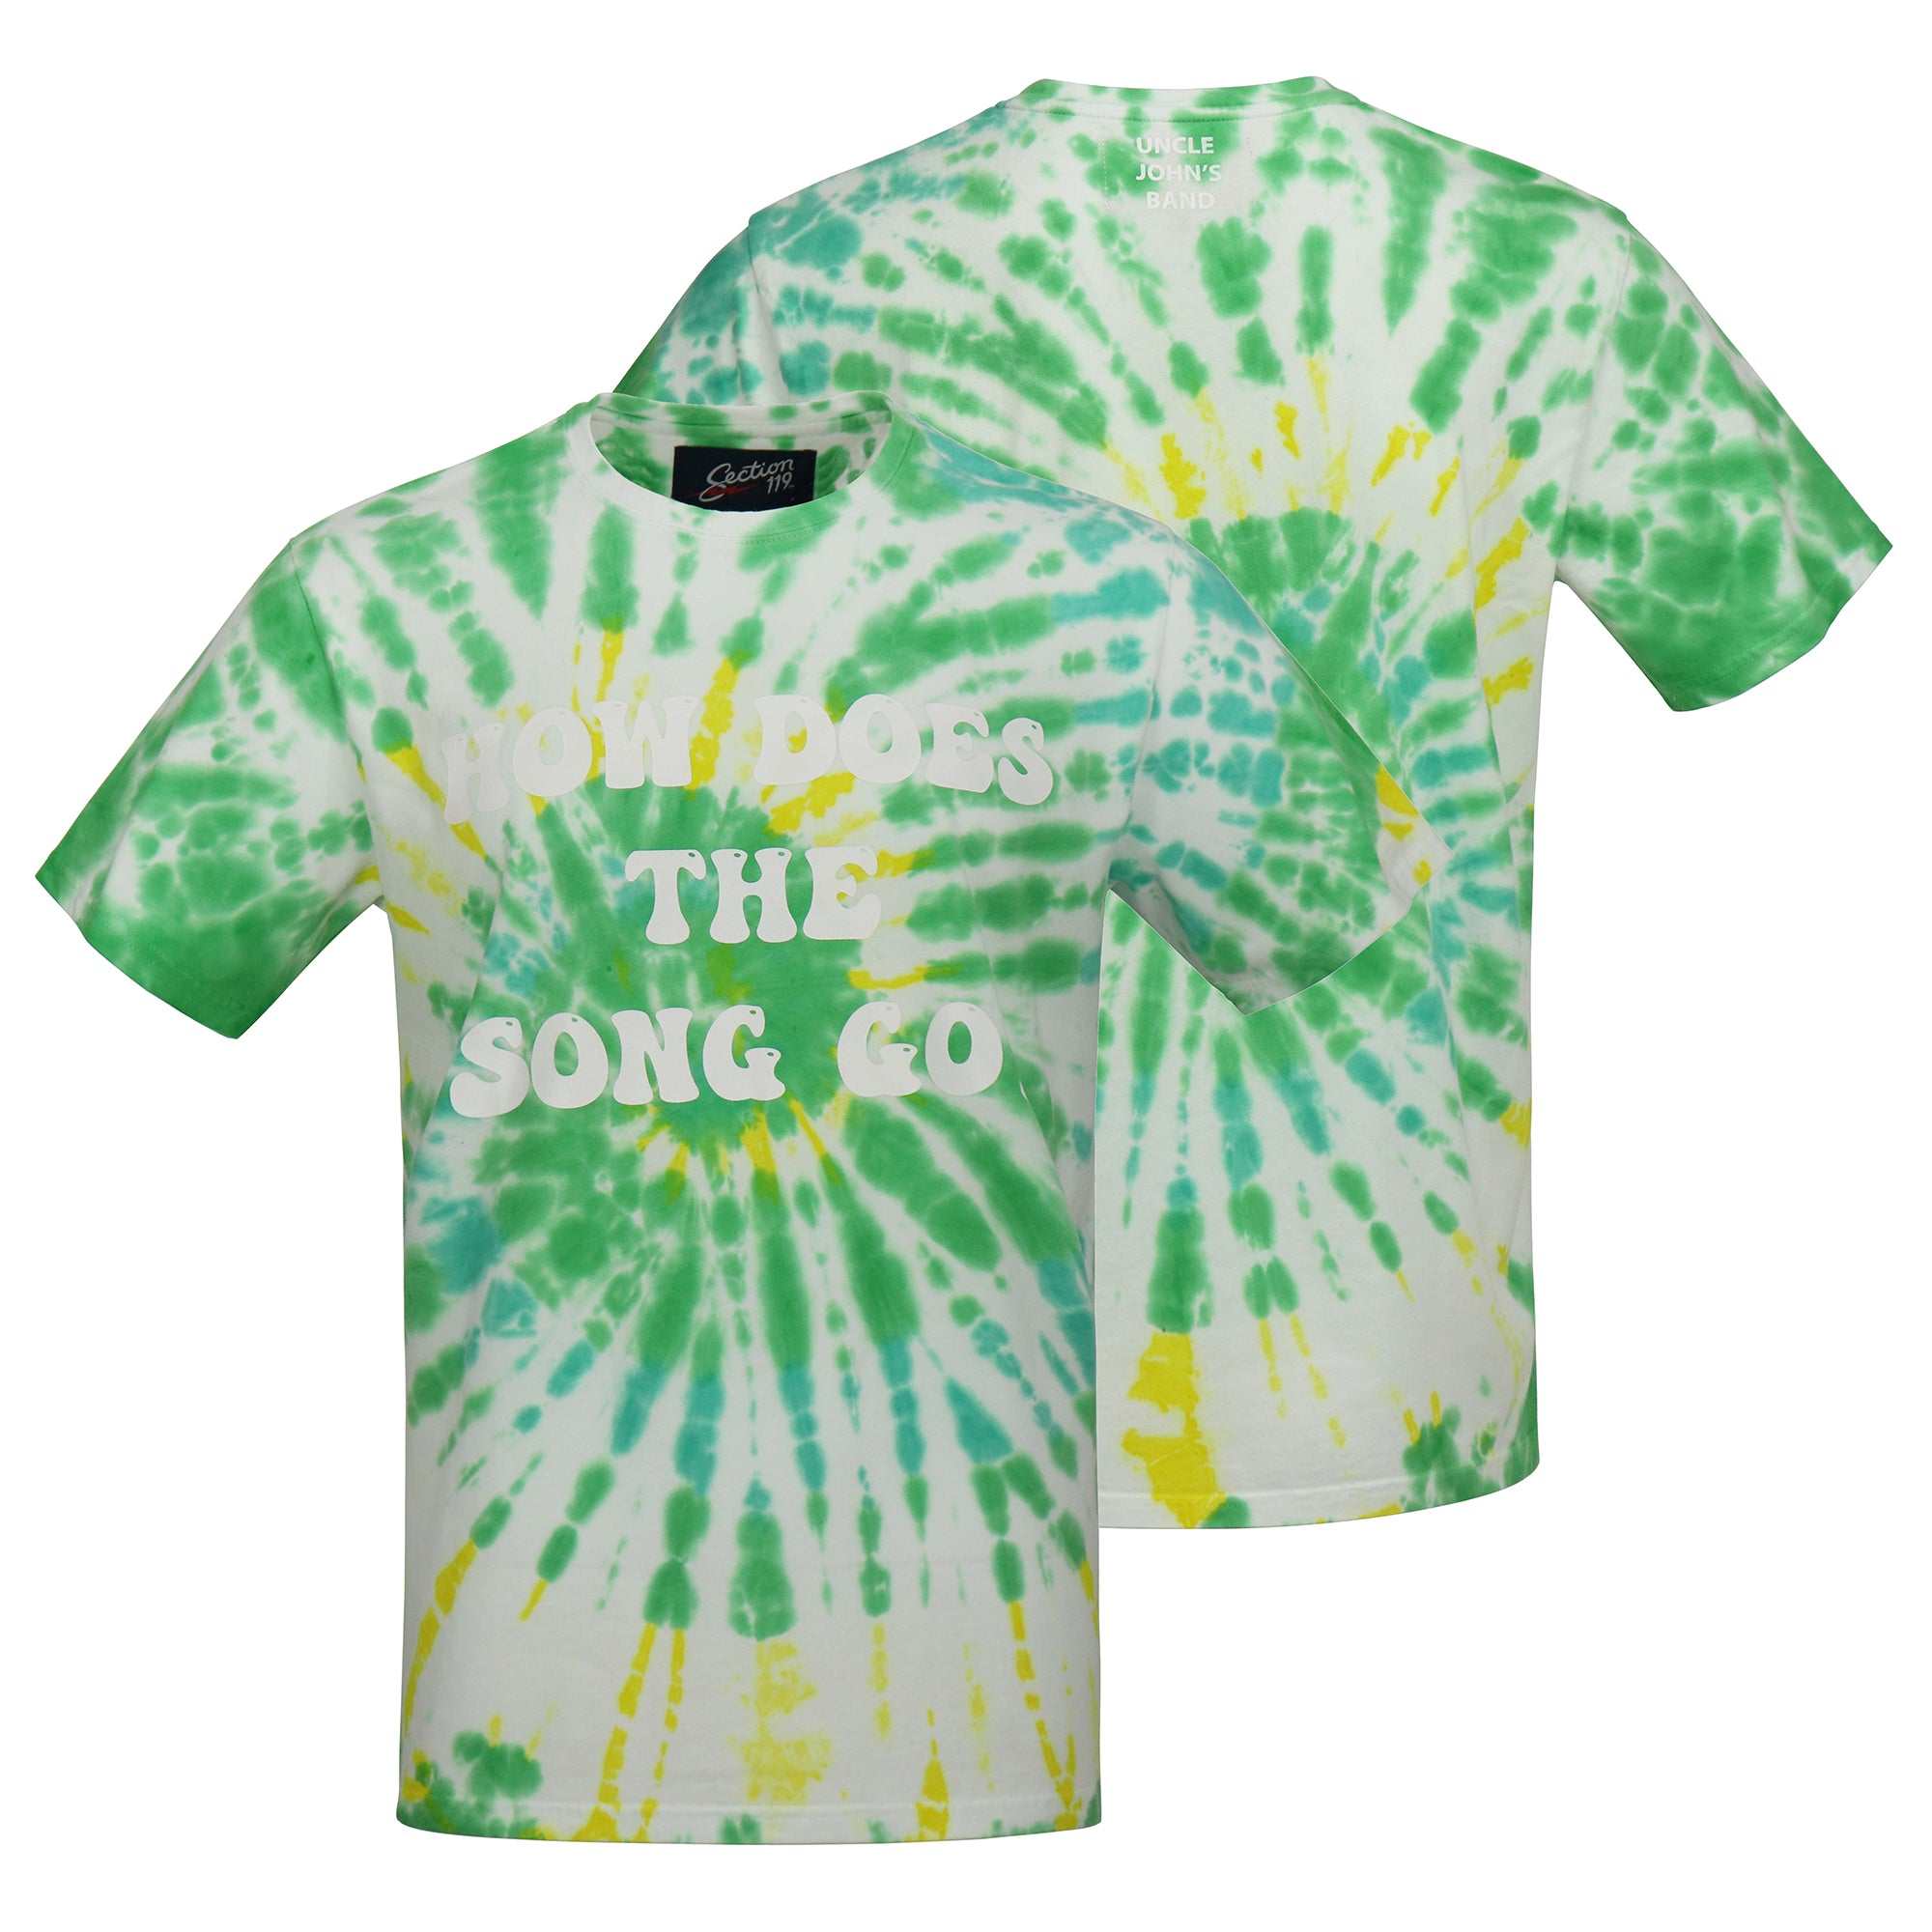 Grateful Dead  How Does the Song Go Tie Dye Shirt - Section 119